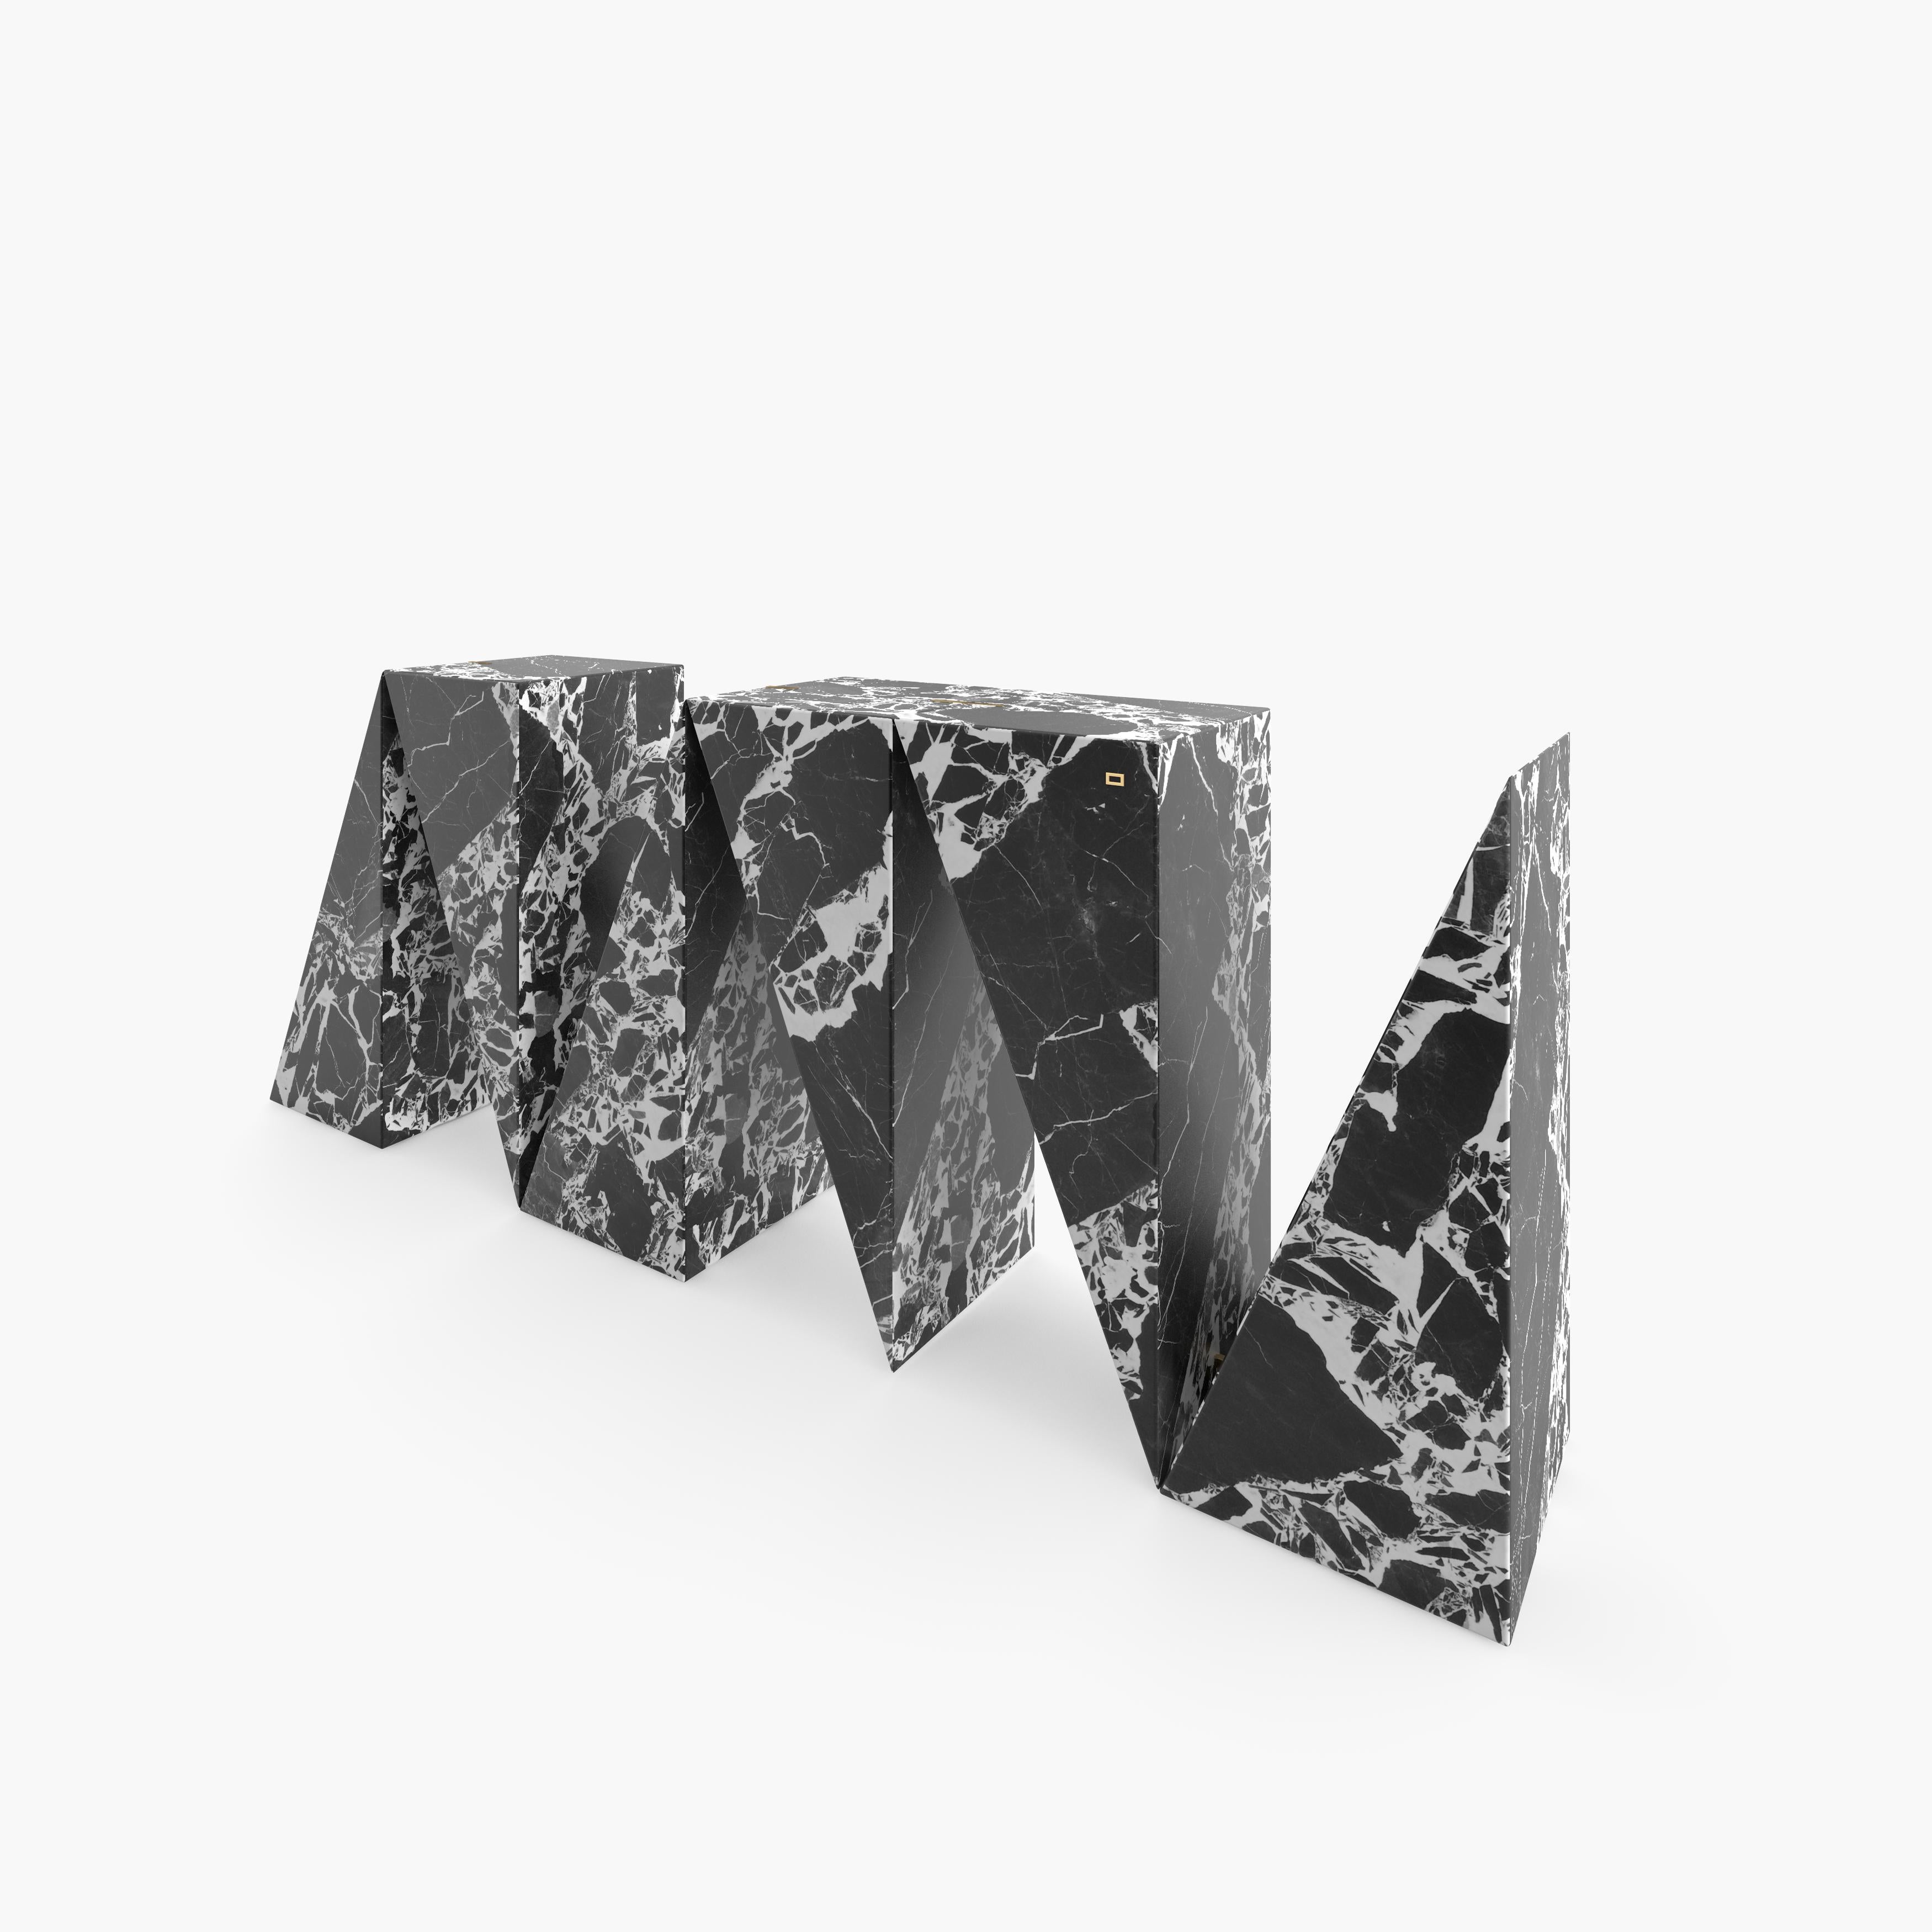 Console-Sideboard, 180x40x85cm Black-White Marble Triangles, Handcrafted pc1/1 For Sale 1